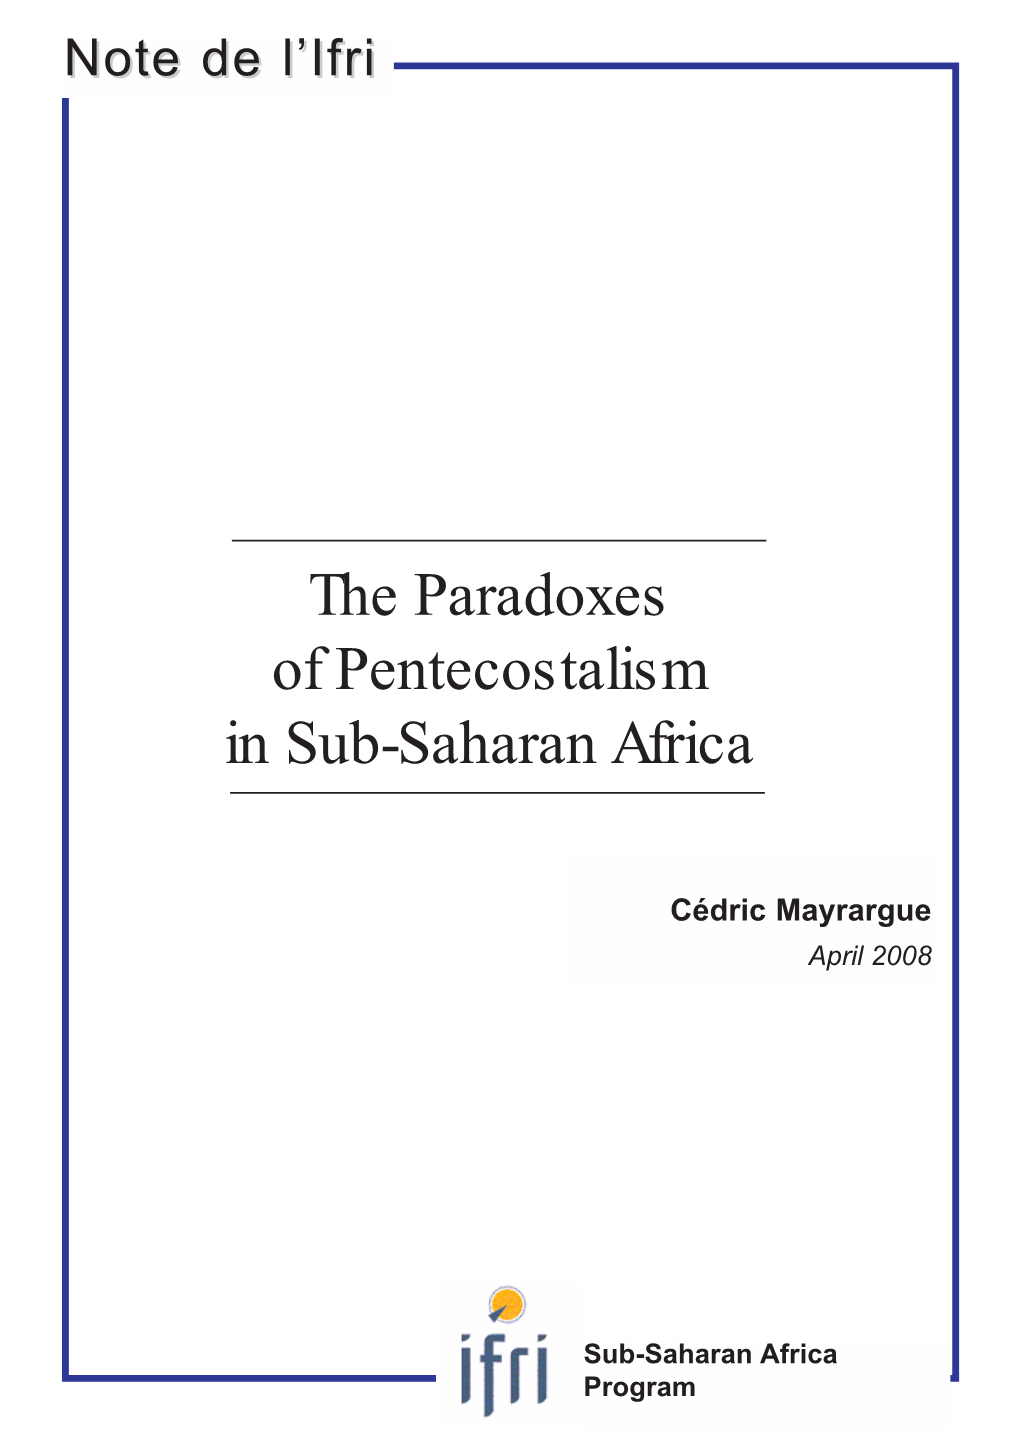 The Paradoxes of Pentecostalism in Sub-Saharan Africa